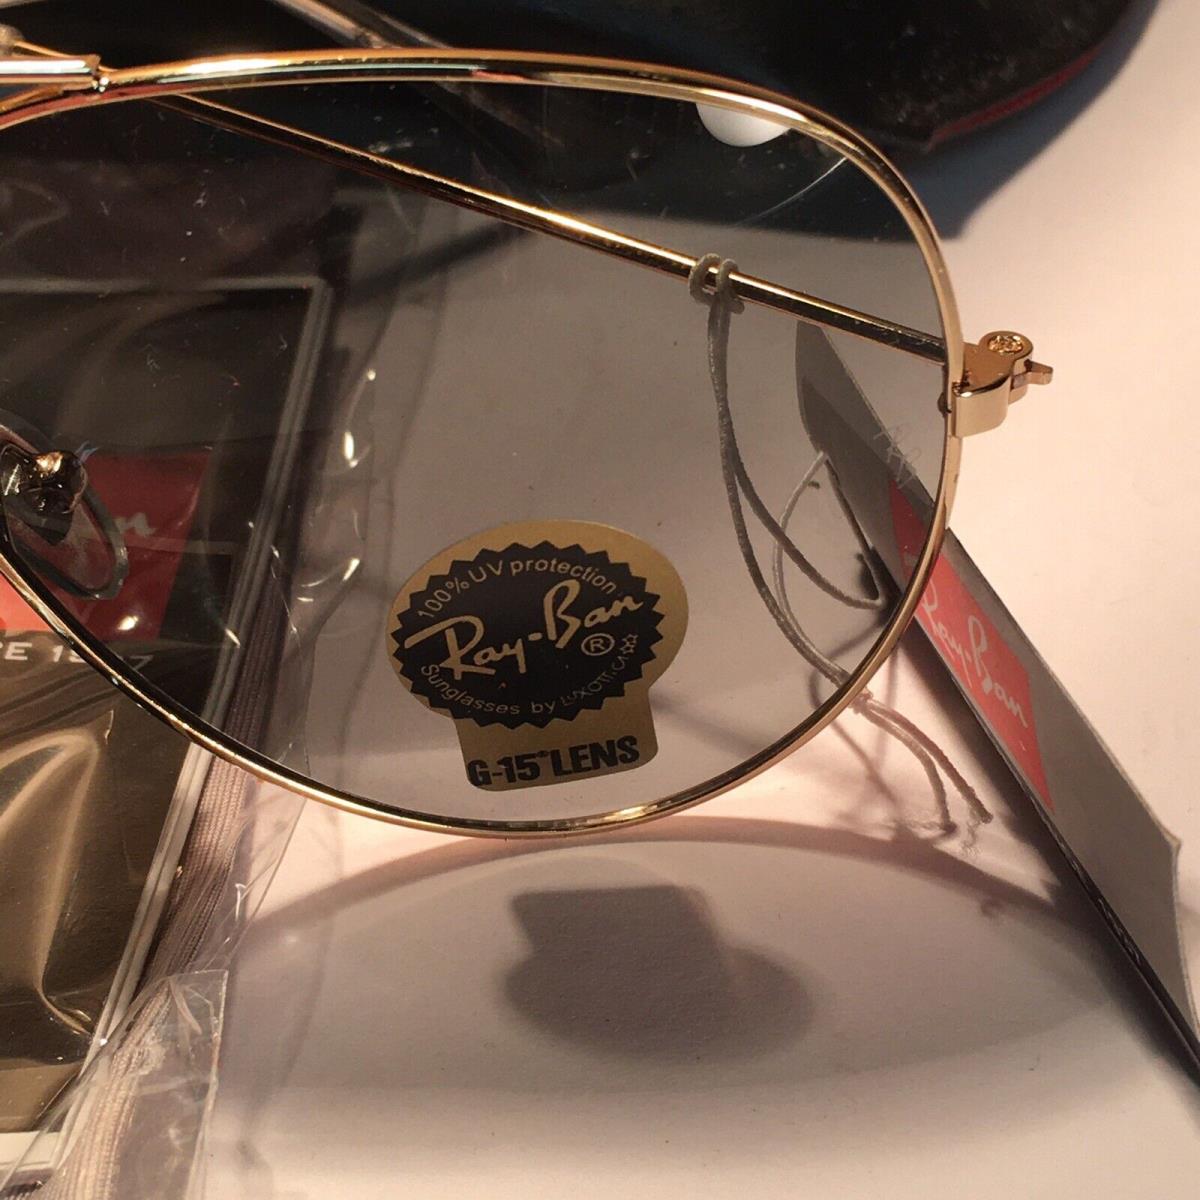 Ray-ban Ray Ban Aviator Sunglasses Luxottica Case Italy Lei Peng Gold Frame  G-15 - Ray-Ban sunglasses - 001404867800 | Fash Brands